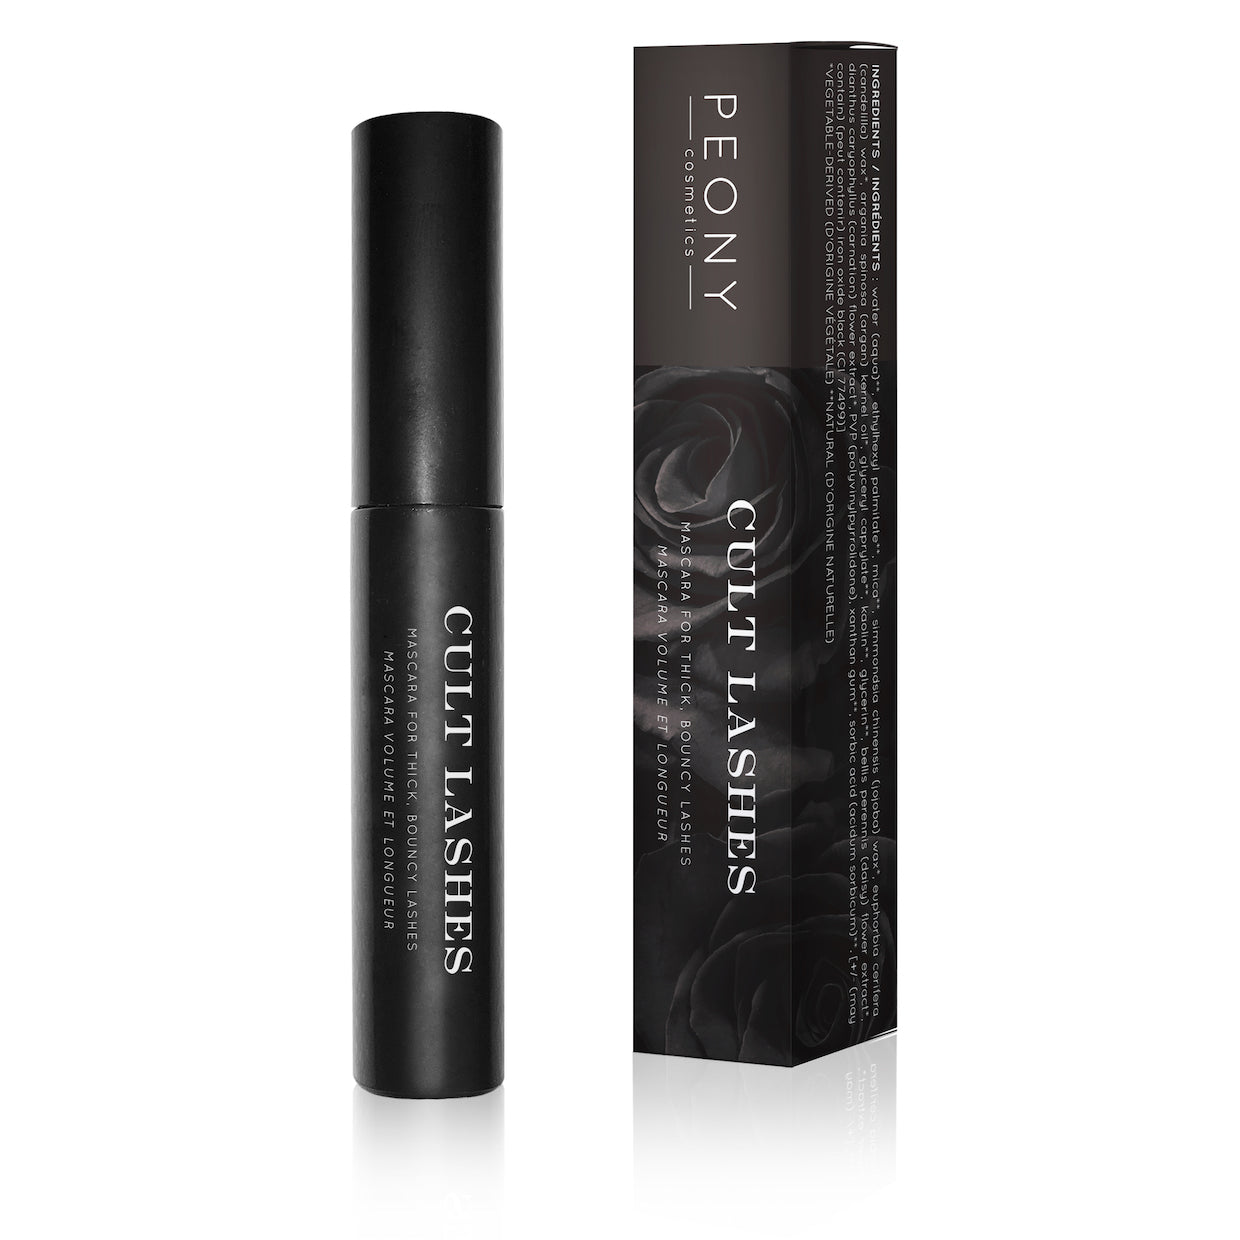 Cult Lashes - Mascara For Thick, Bouncy Lashes